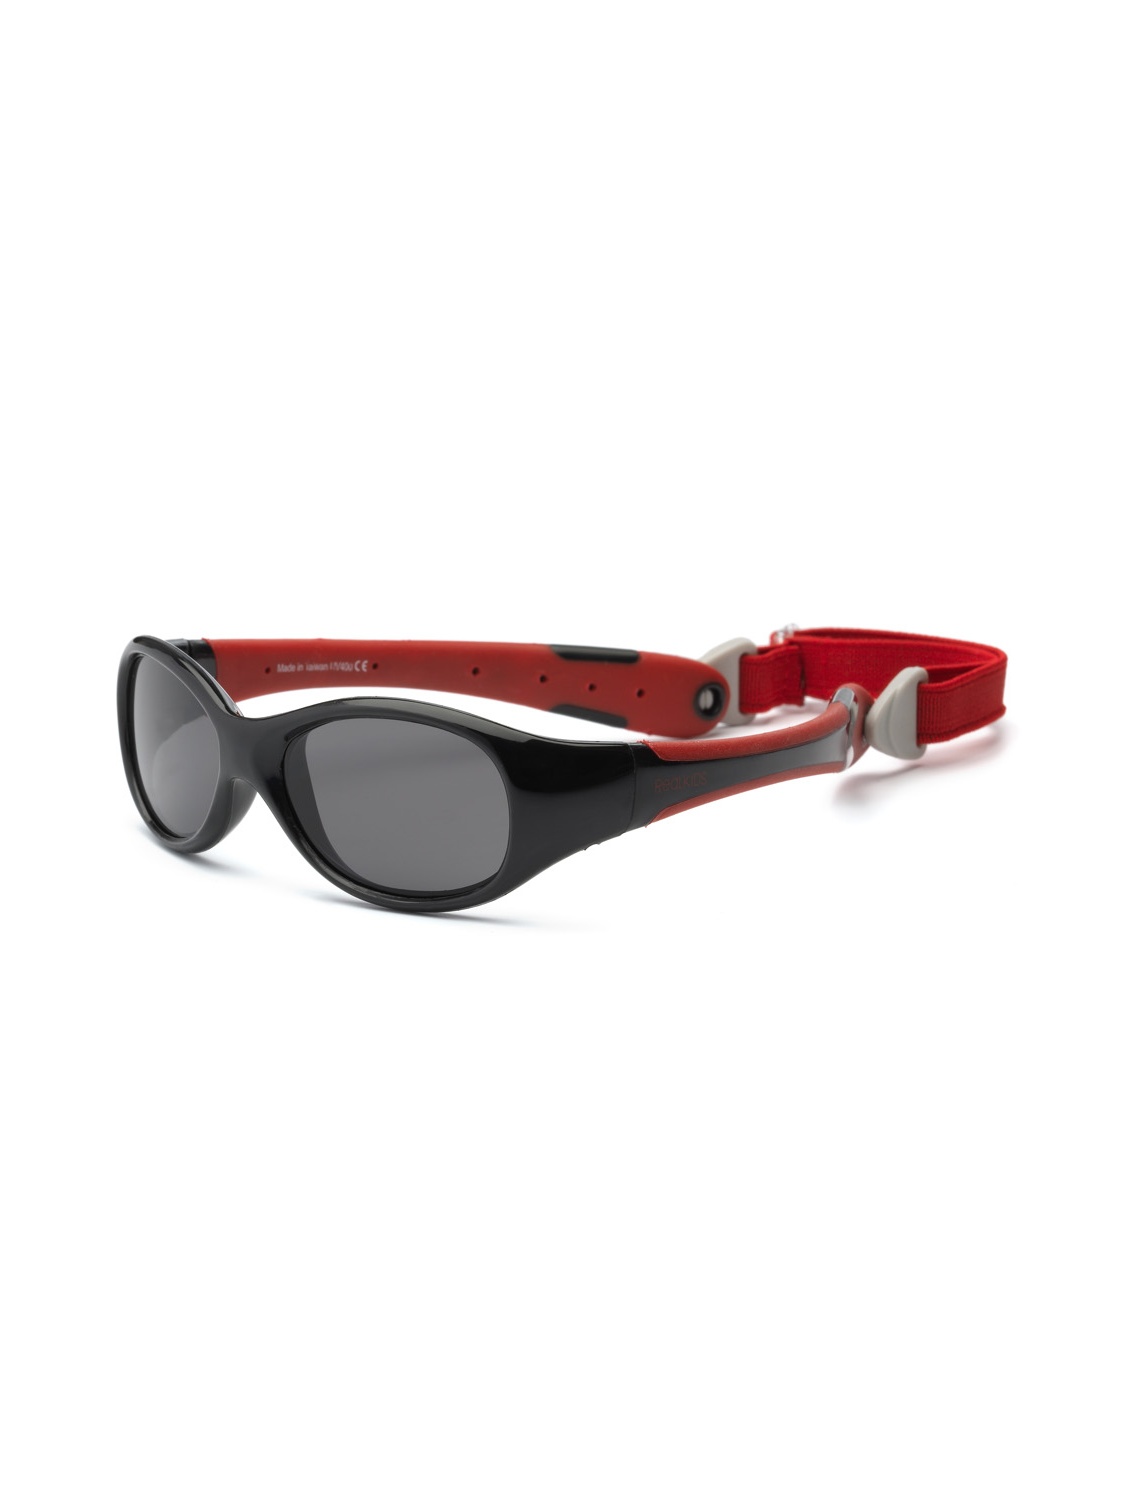 Real Kids Black/Red Flex Fit Removable Band Smoke Lens, 0+ - image 2 of 2